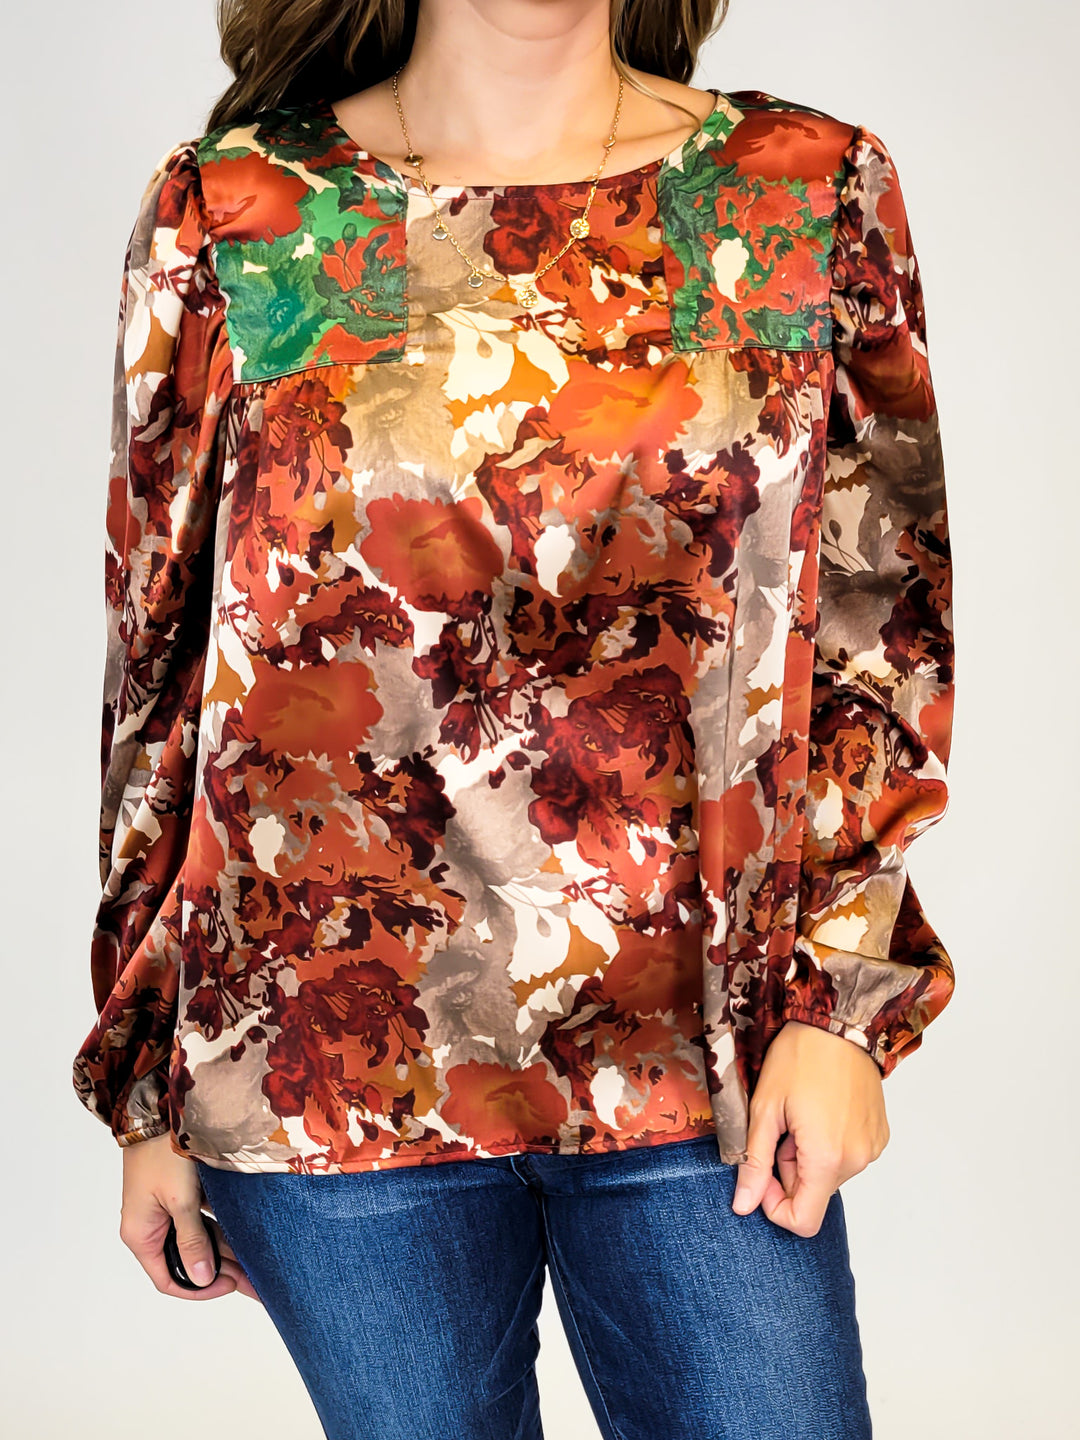 WOMEN'S ABSTRACT BOTANICAL PRINT LONG SLEEVE BLOUSE - TAUPE/RUST